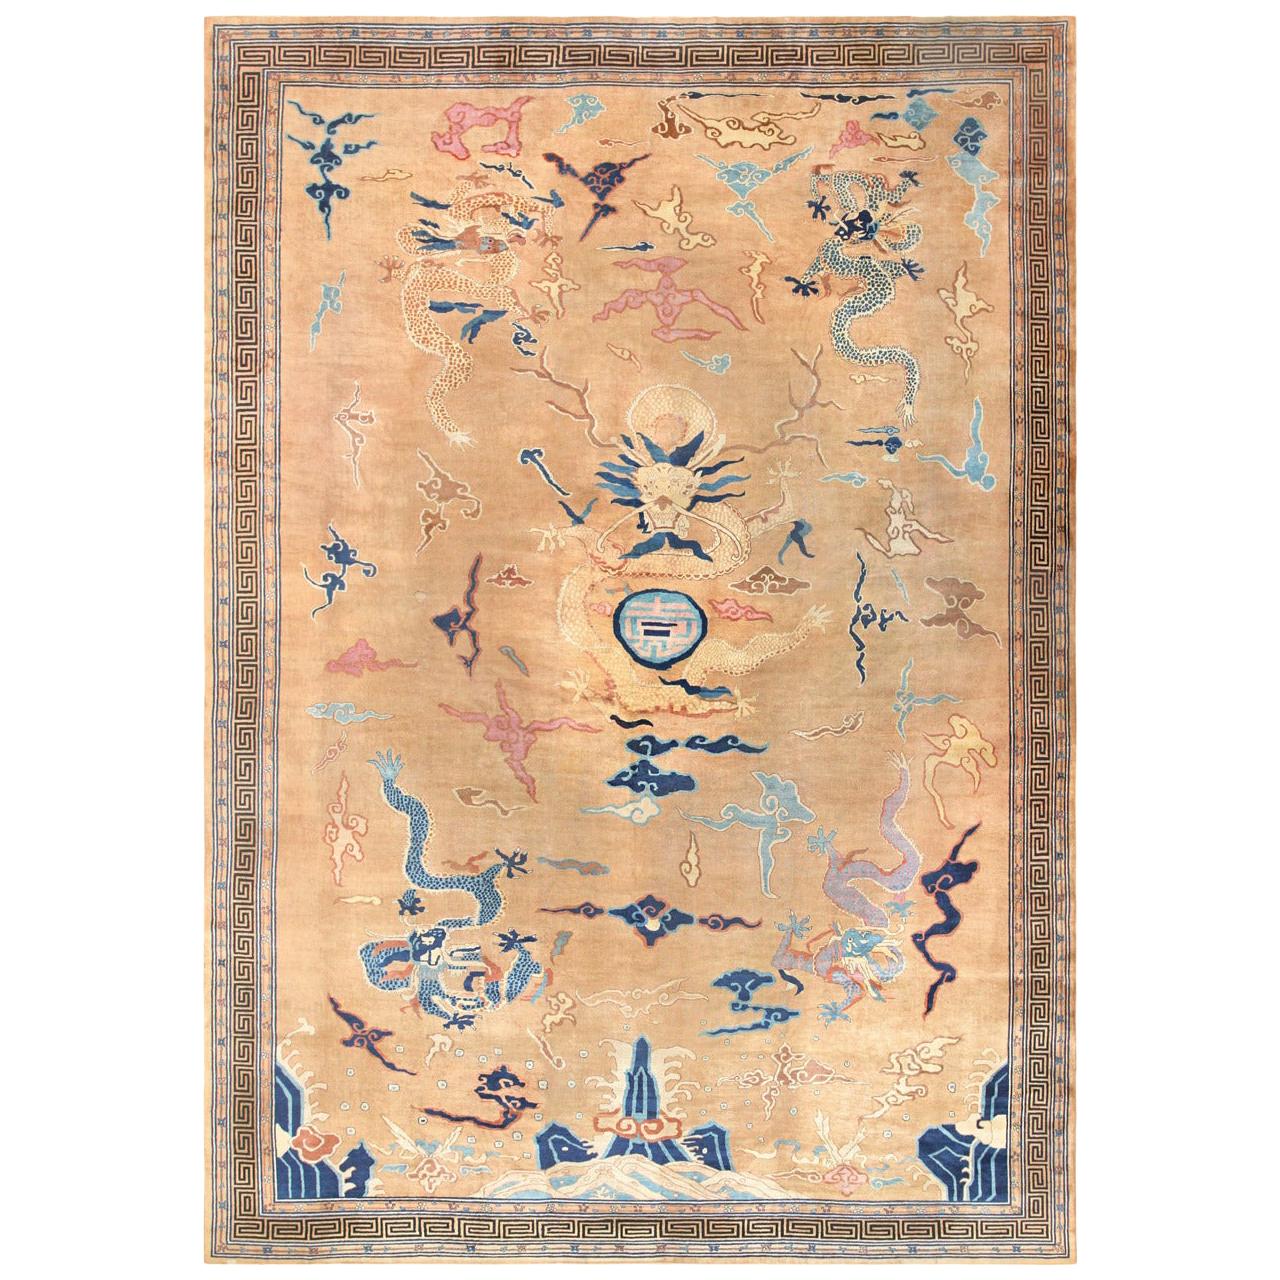 Oversized Antique Dragon Design Chinese Rug. Size: 15 ft 4 in x 22 ft